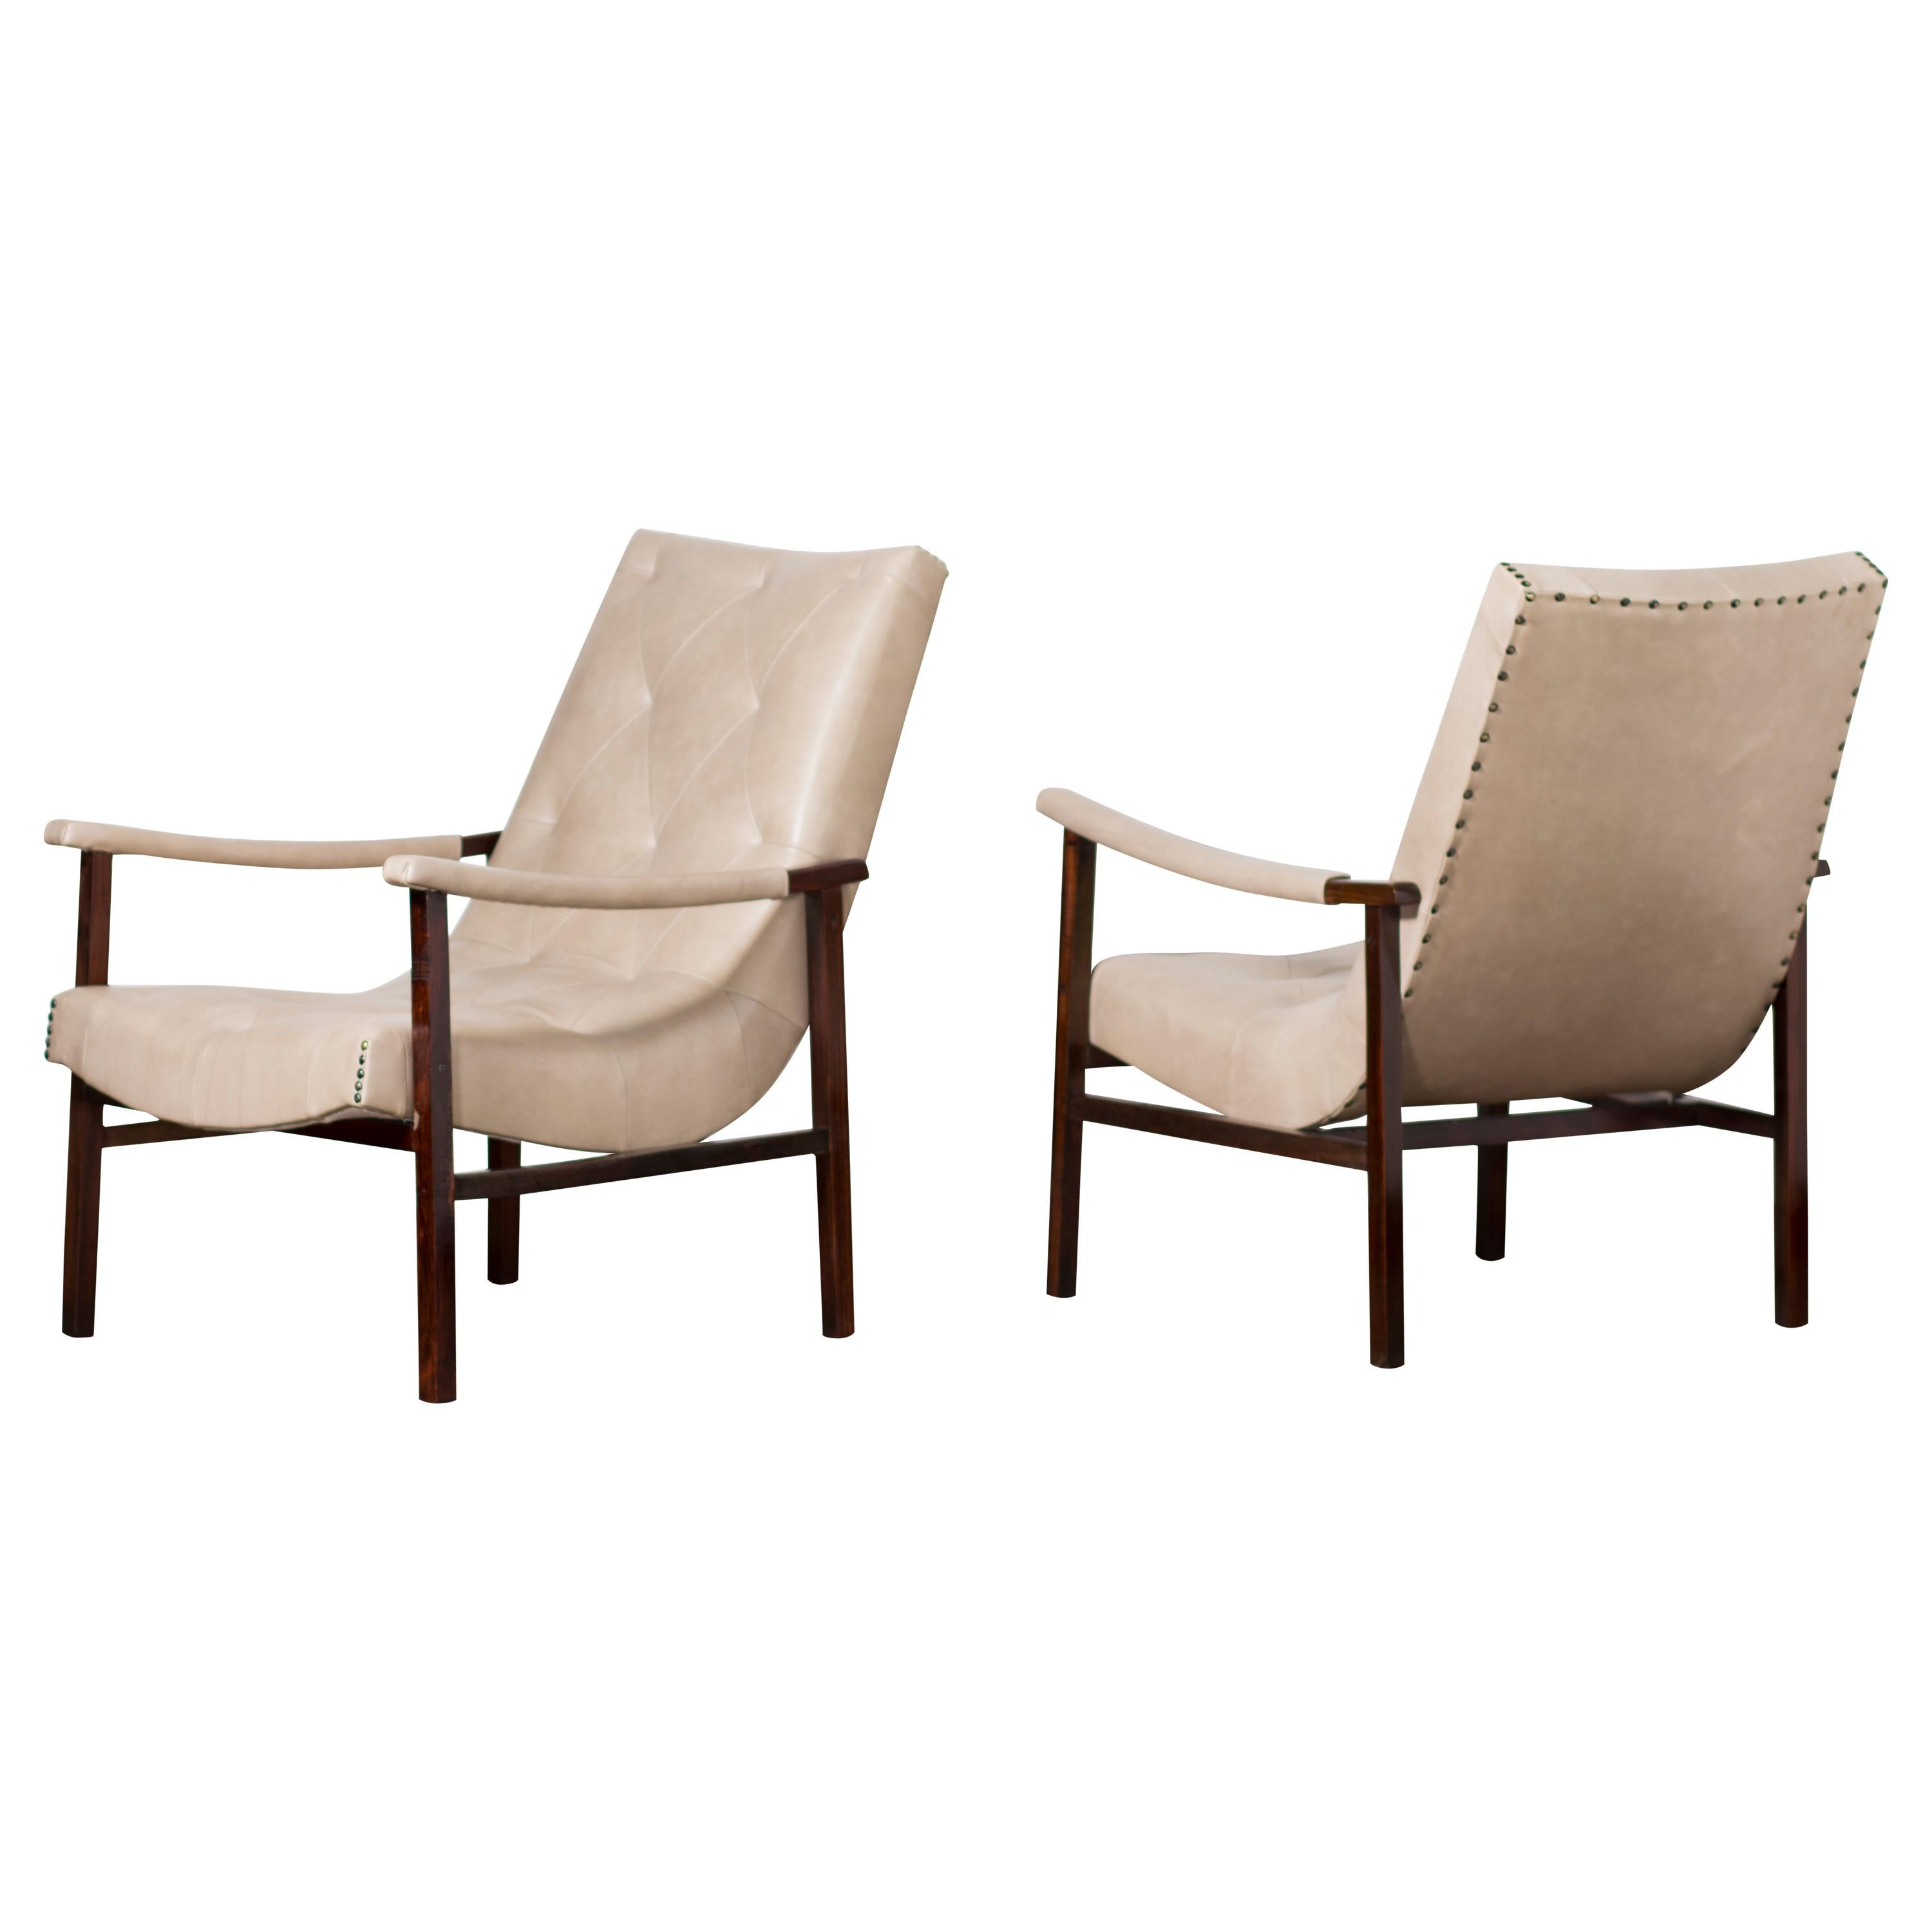 Pair of Modern Brazilian Rosewood Armchairs by Gelli, circa the 1950s For Sale